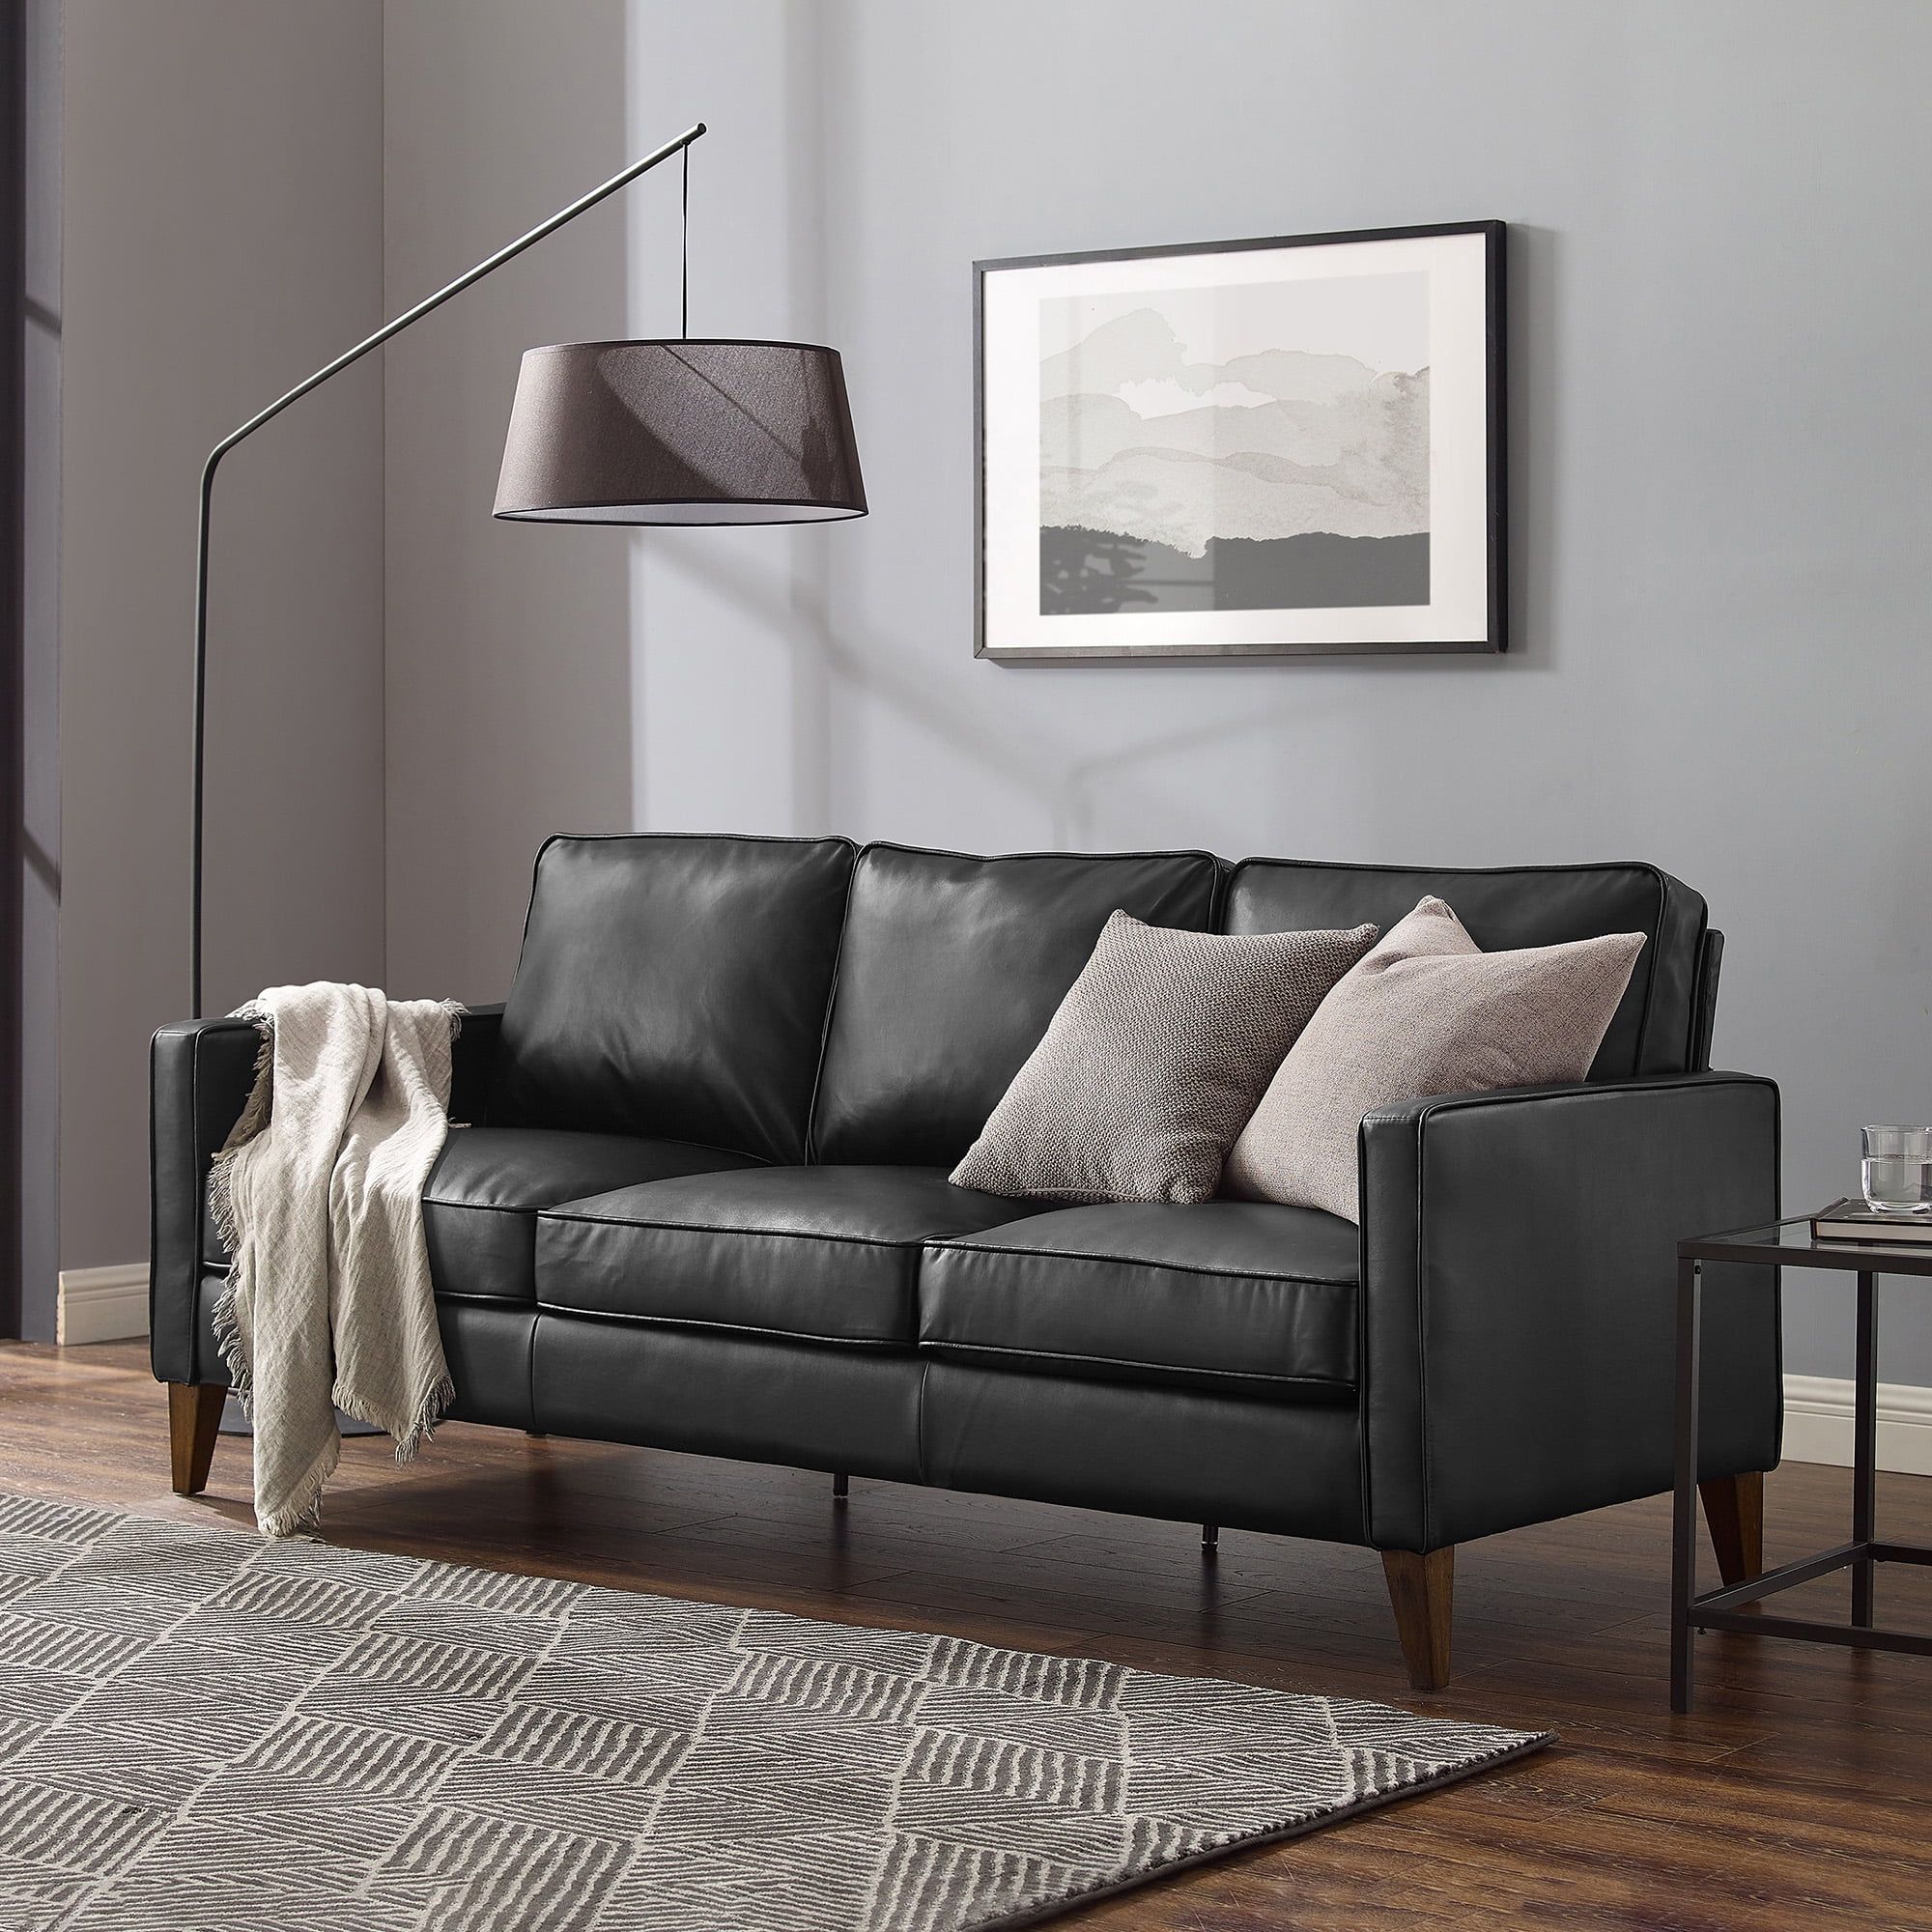 Hillsdale Jianna Faux Leather Sofa, Black – Walmart With Regard To Faux Leather Sofas (View 14 of 15)